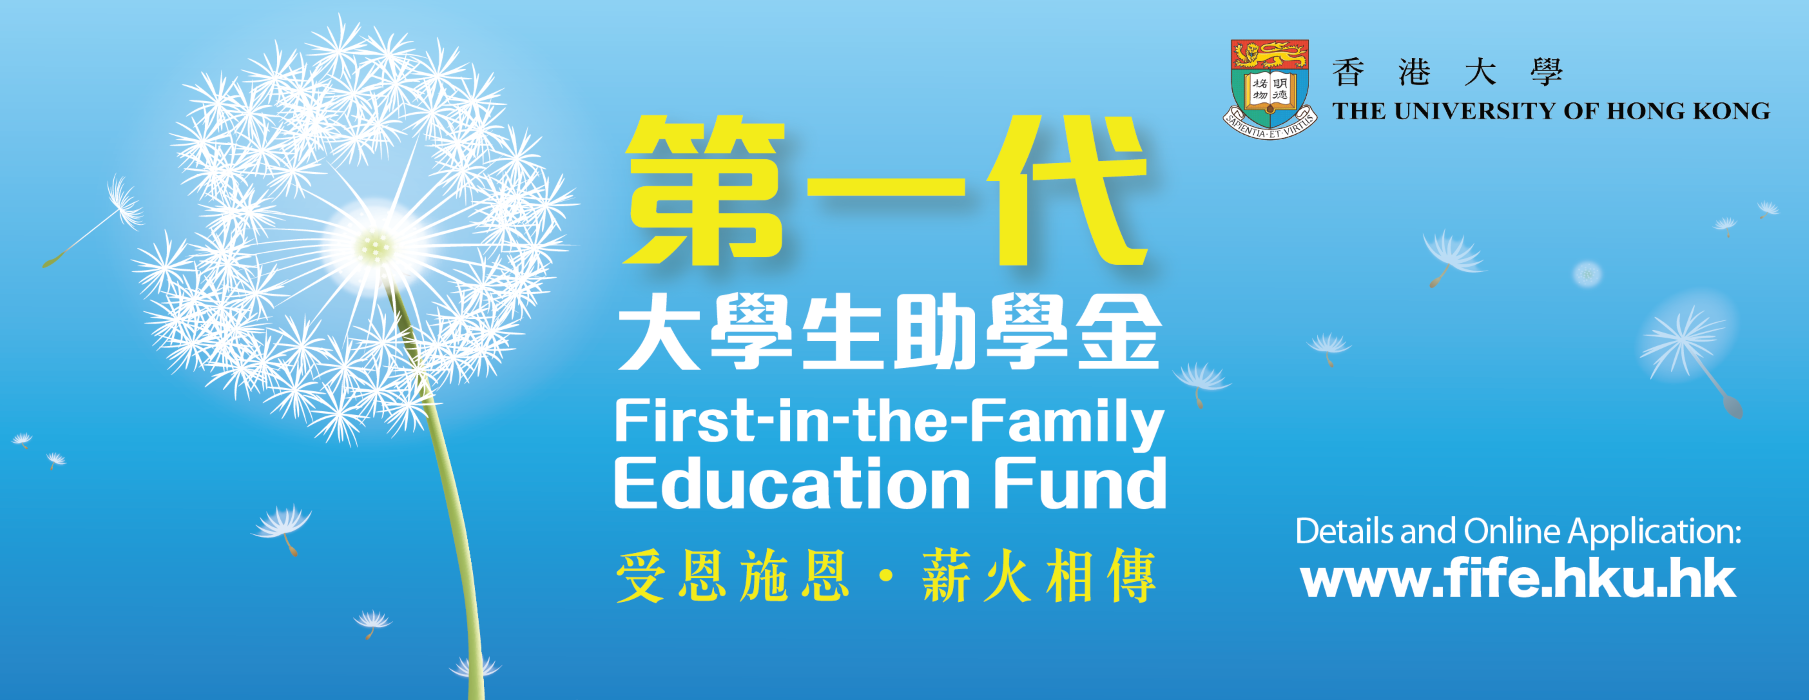 First-in-the-Family Education Fund (Round II) Application